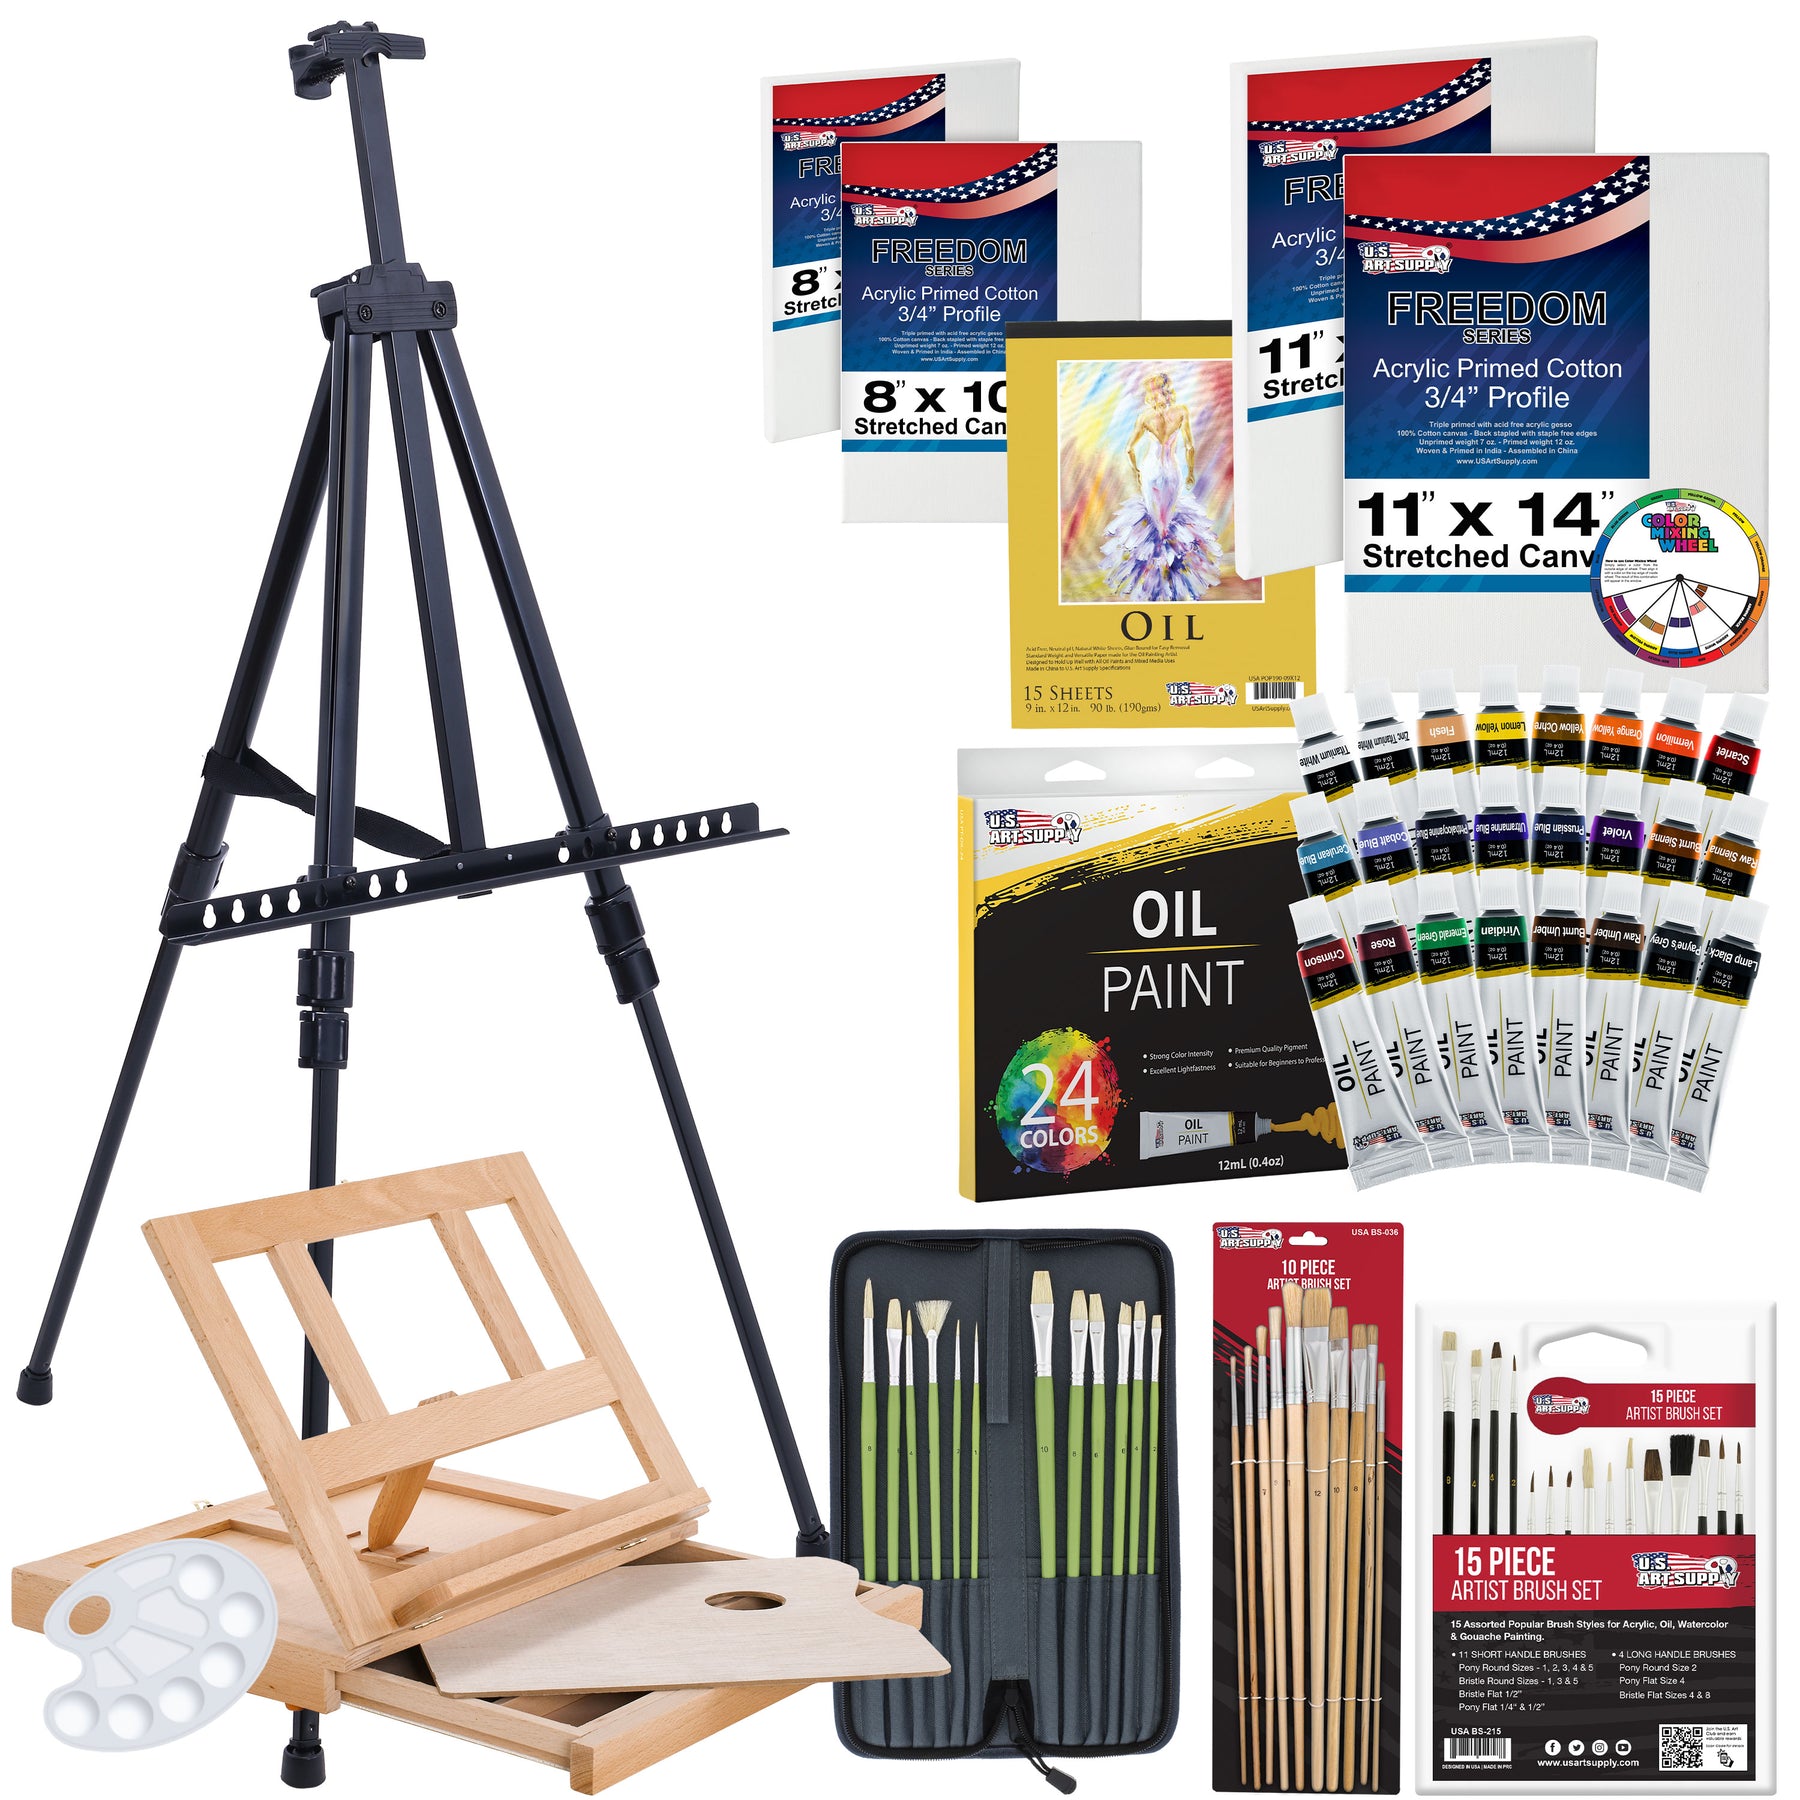 US Art Supply 13-Piece Artist Painting Set with 6 Vivid Acrylic Paint  Colors, 12 Easel, 2 Canvas Panels, 3 Brushes, Painting Palette - Fun  Children